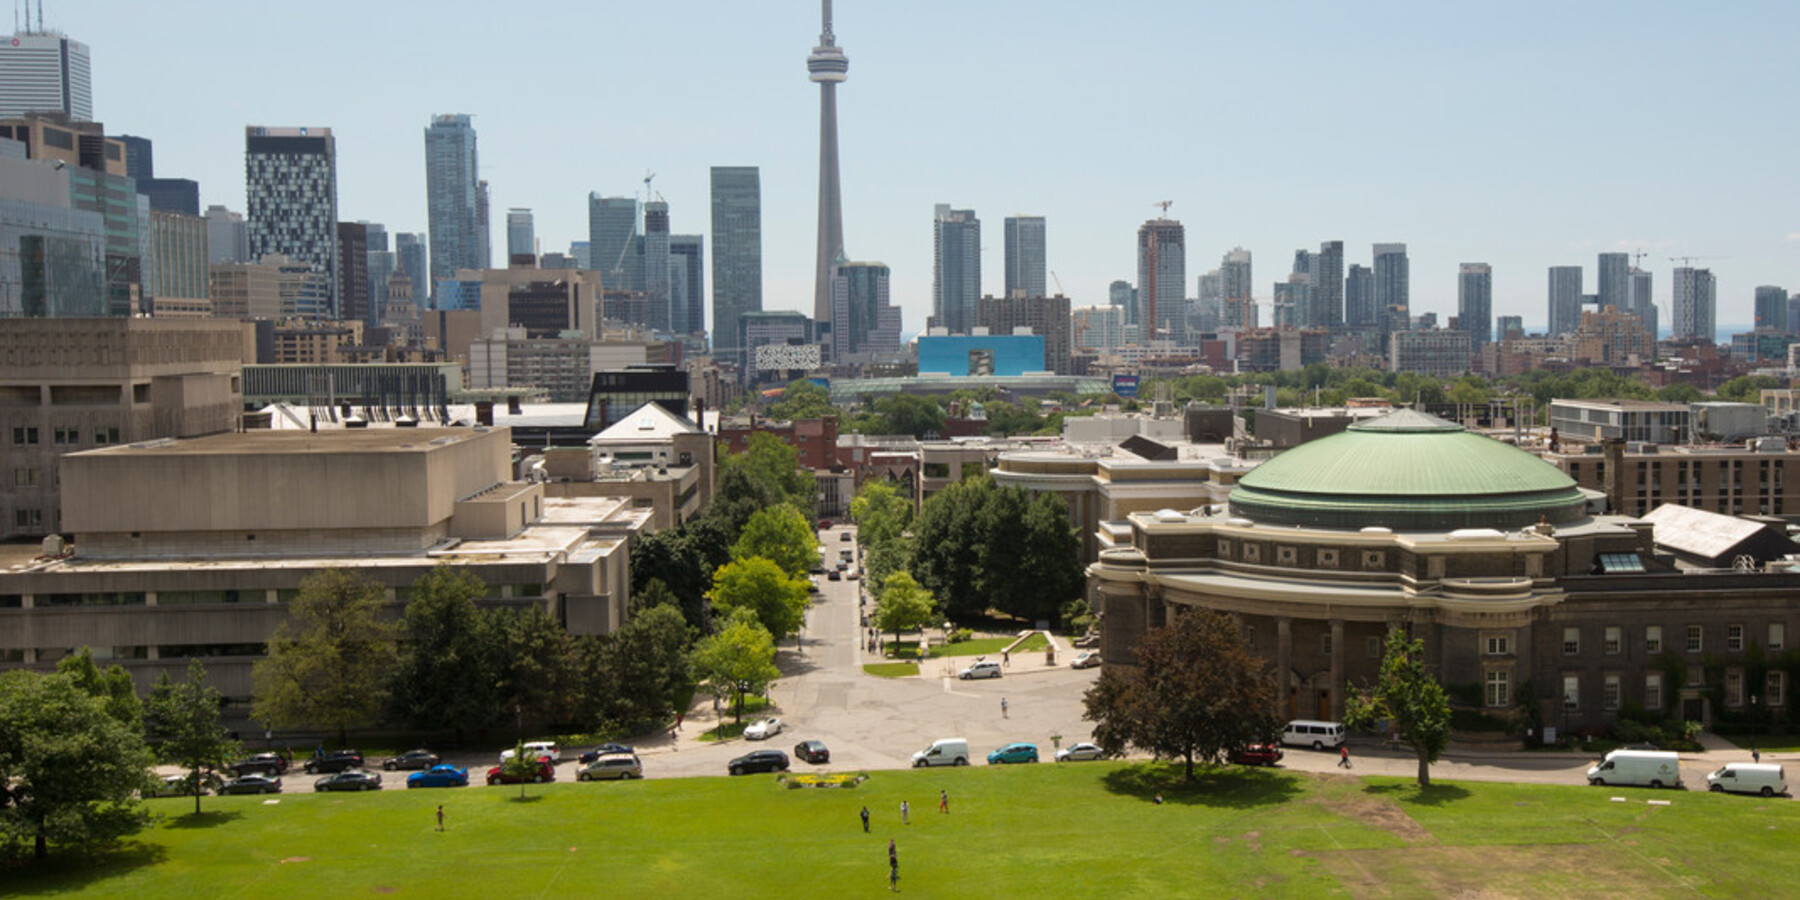 uoft_con_hall_with_cn_tower_in_the_back